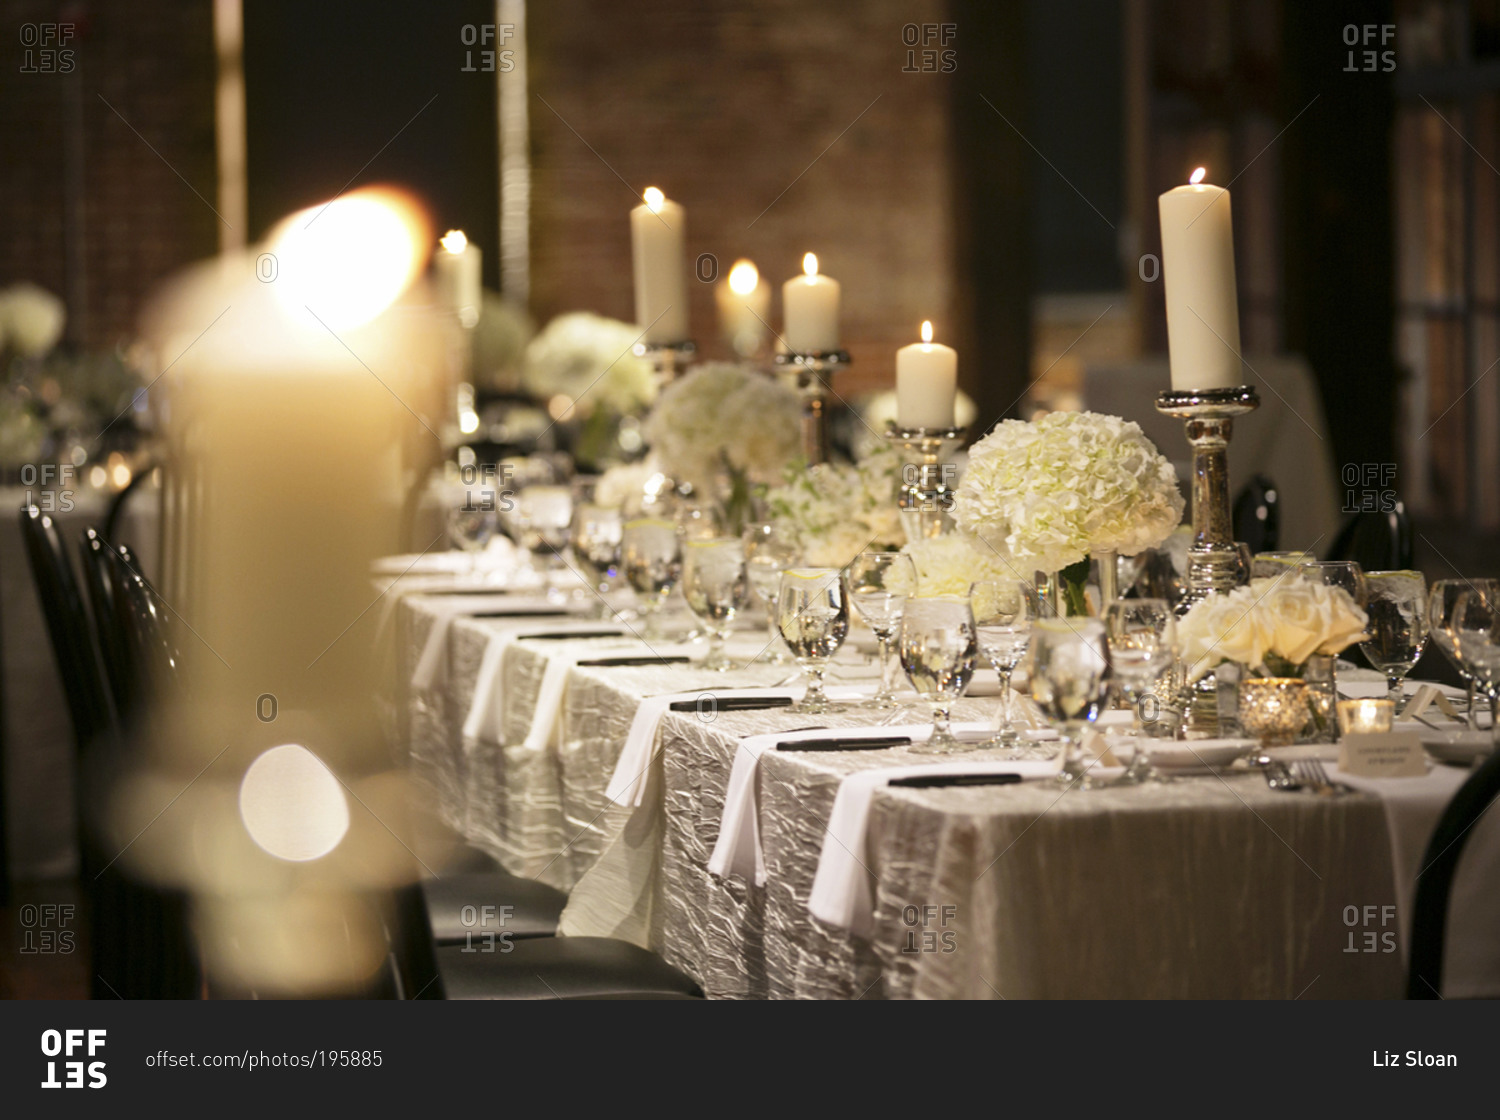 A wedding party's table set with pillar candles at a wedding reception